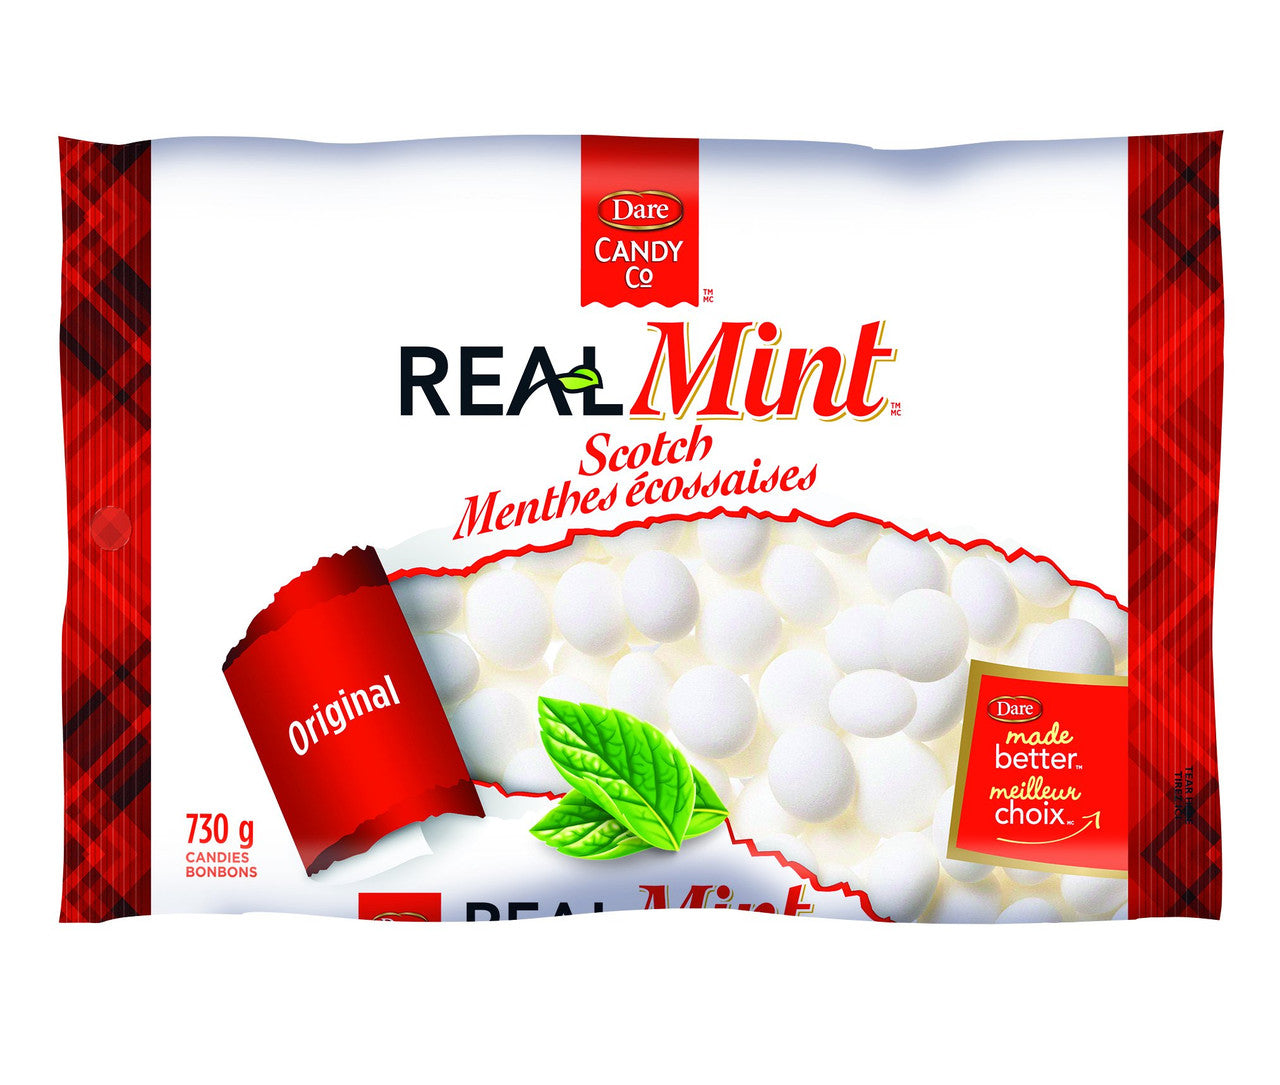 Dare Real Mint Scotch Mints Original, 730g/1.6lbs - 12 Count {Imported from Canada}